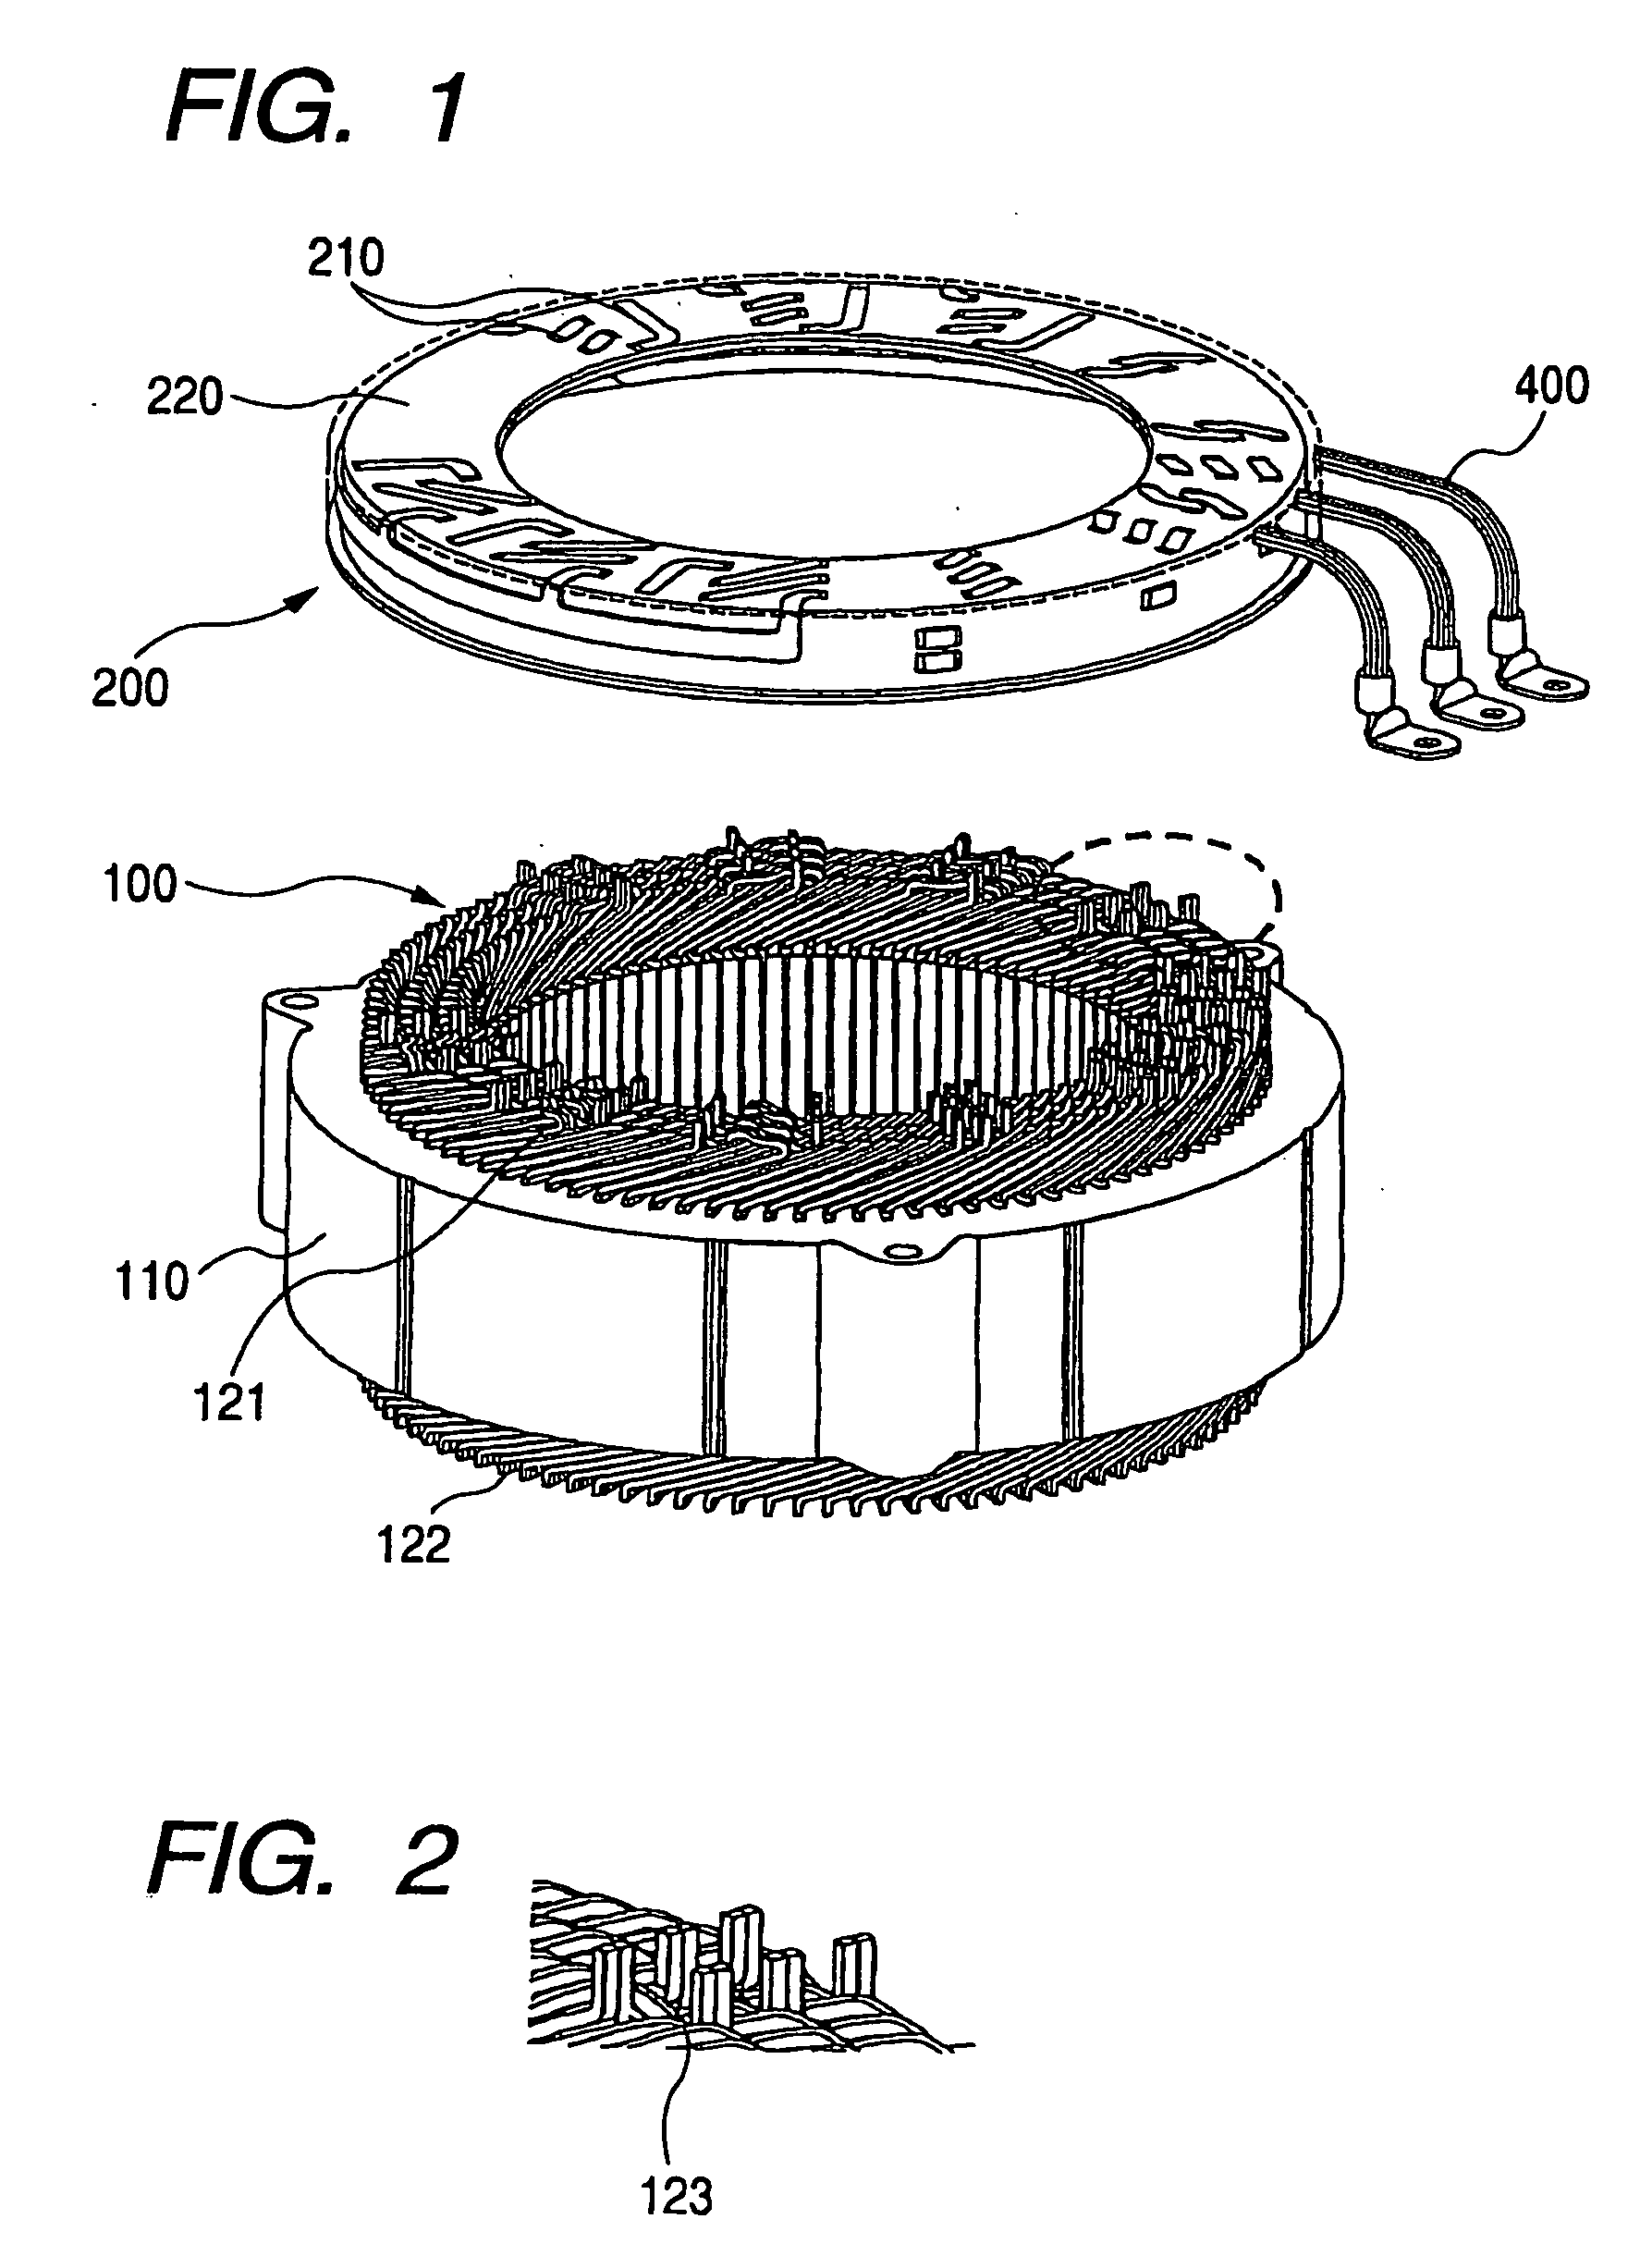 Stator coil including sequentially connected segment conductors preferably applicable to an electric rotary machine